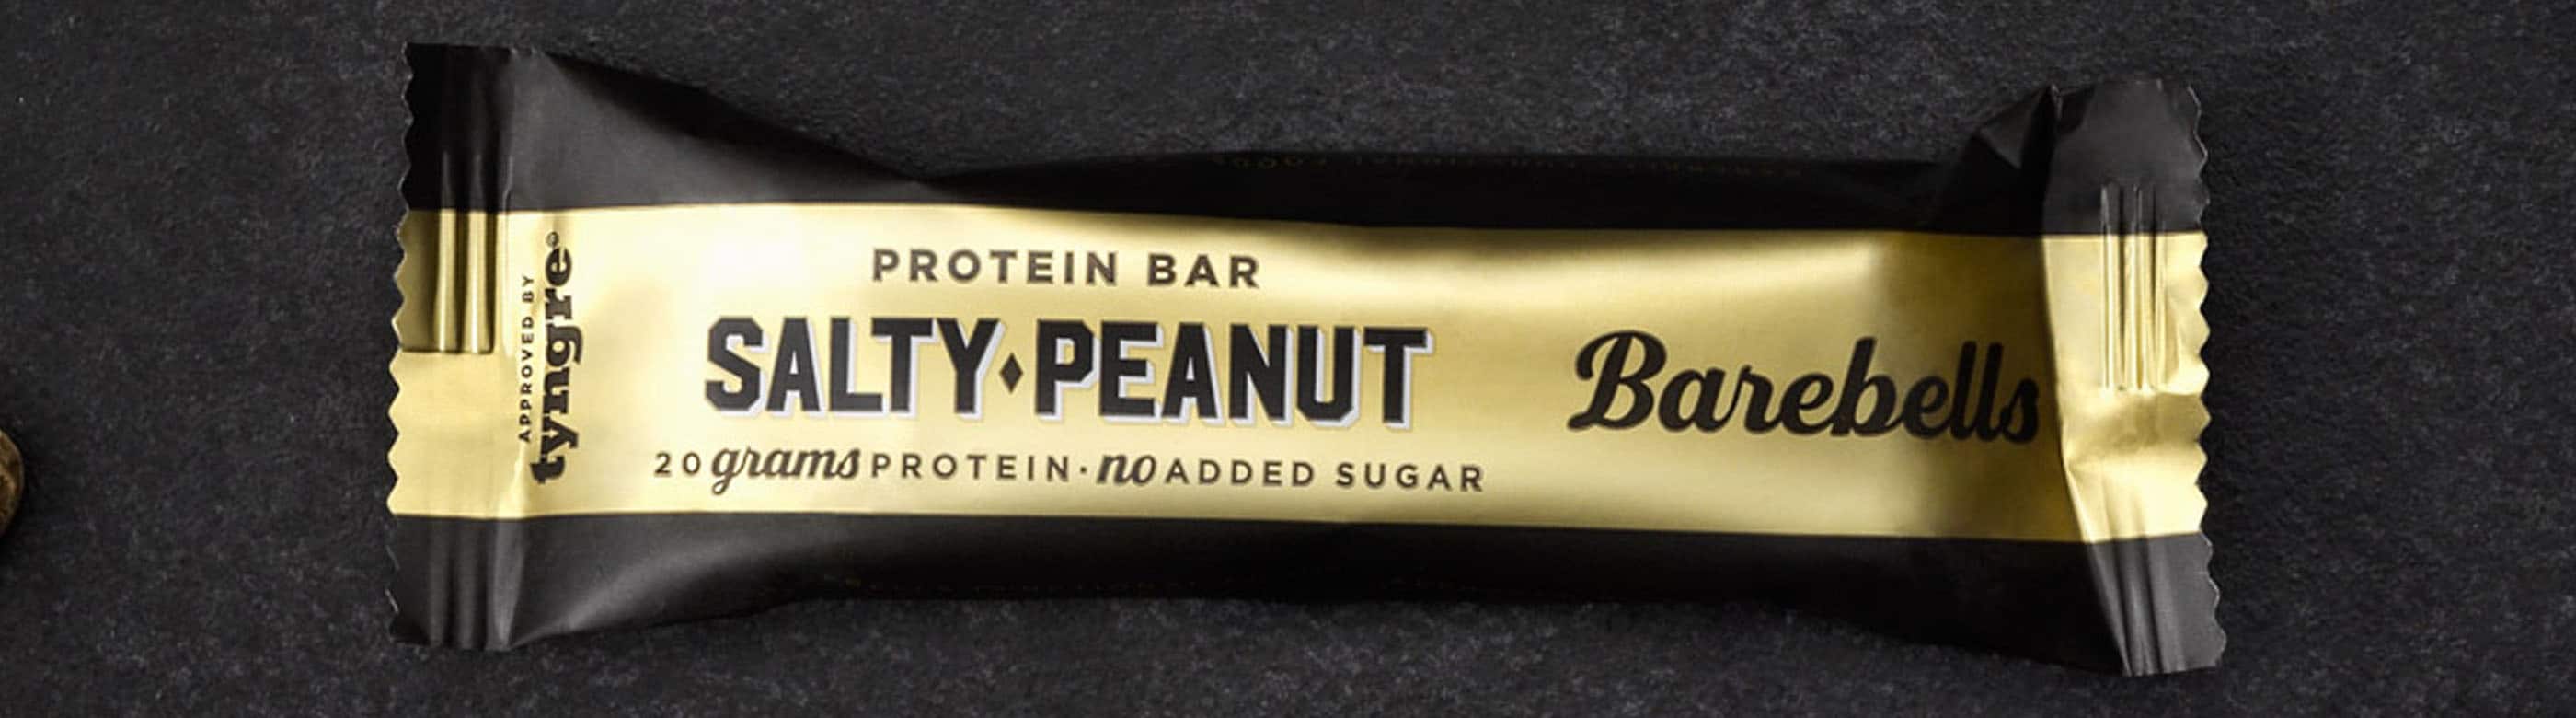 Favorite bar in a new flavor!